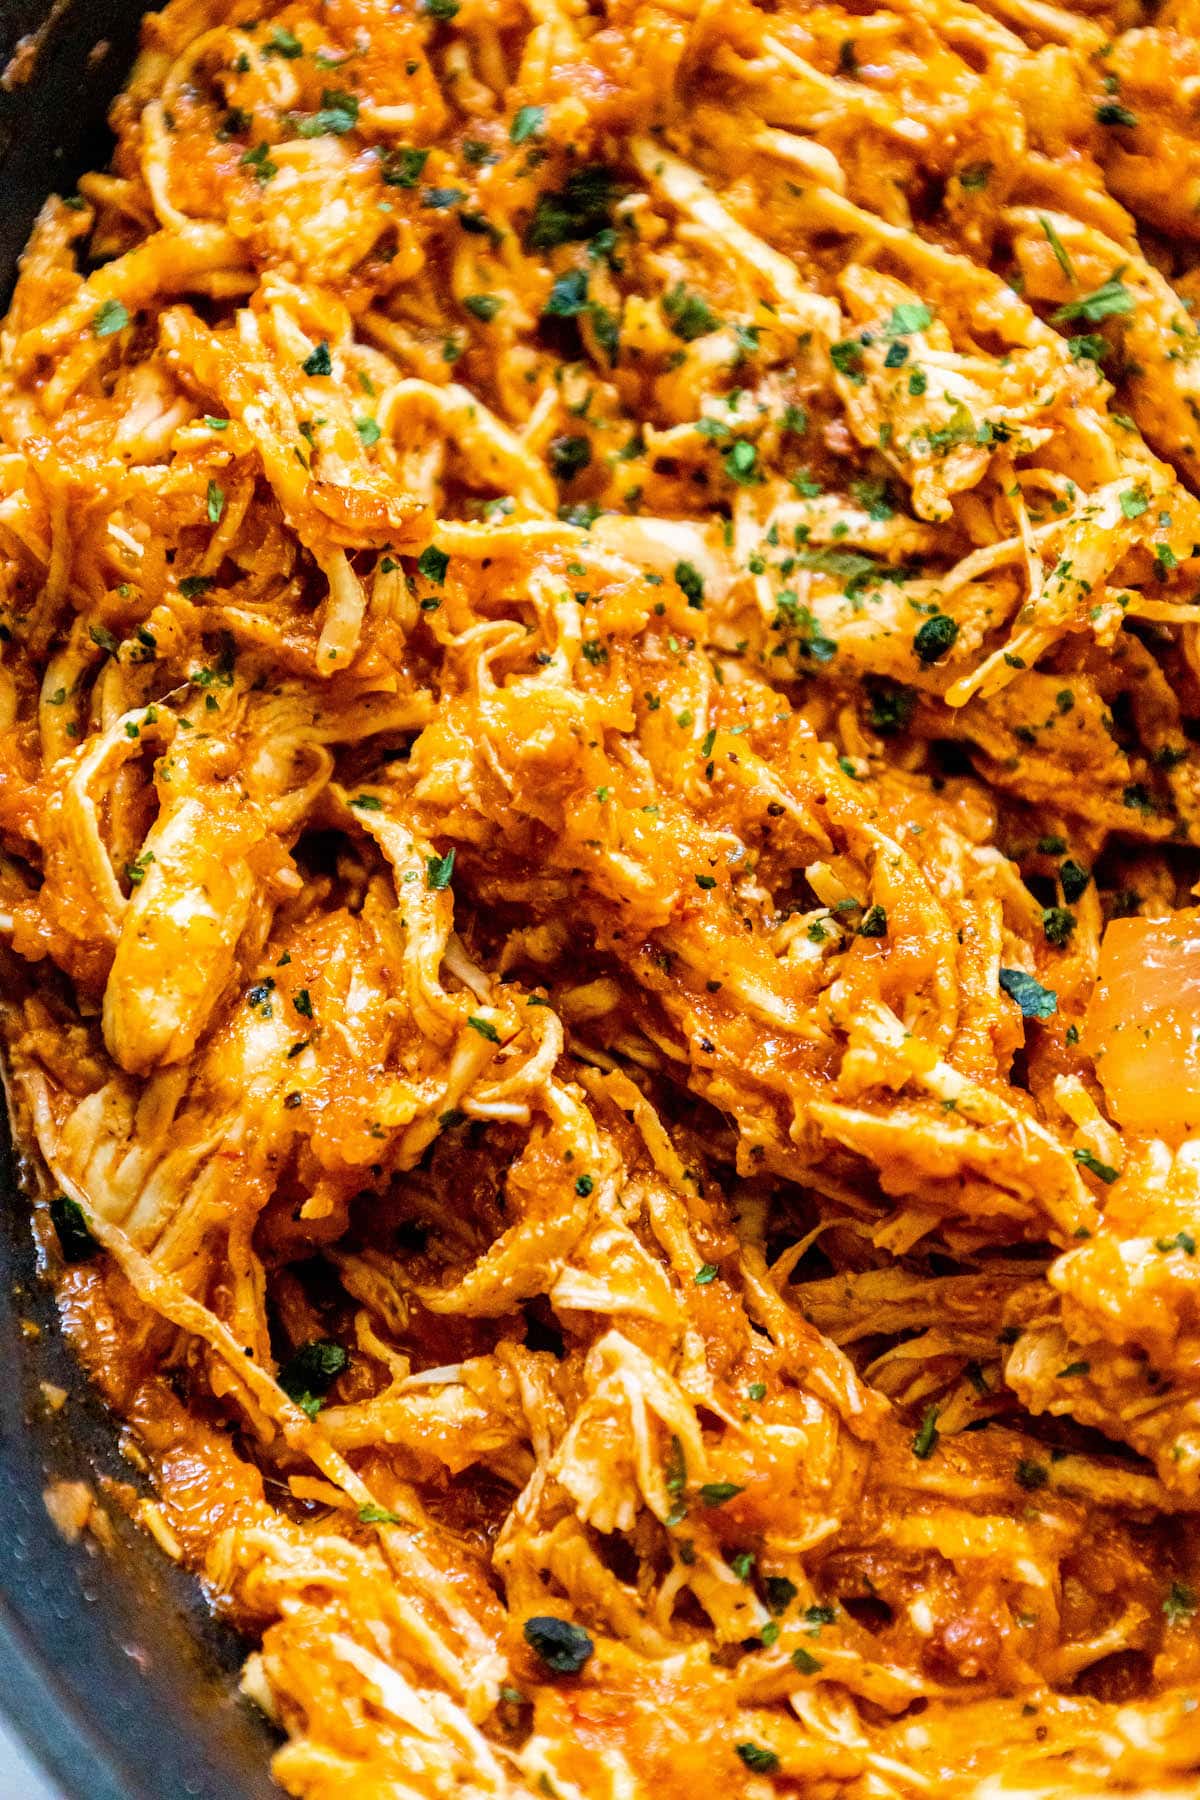 shredded chicken tinga in a pan with chopped cilantro on top